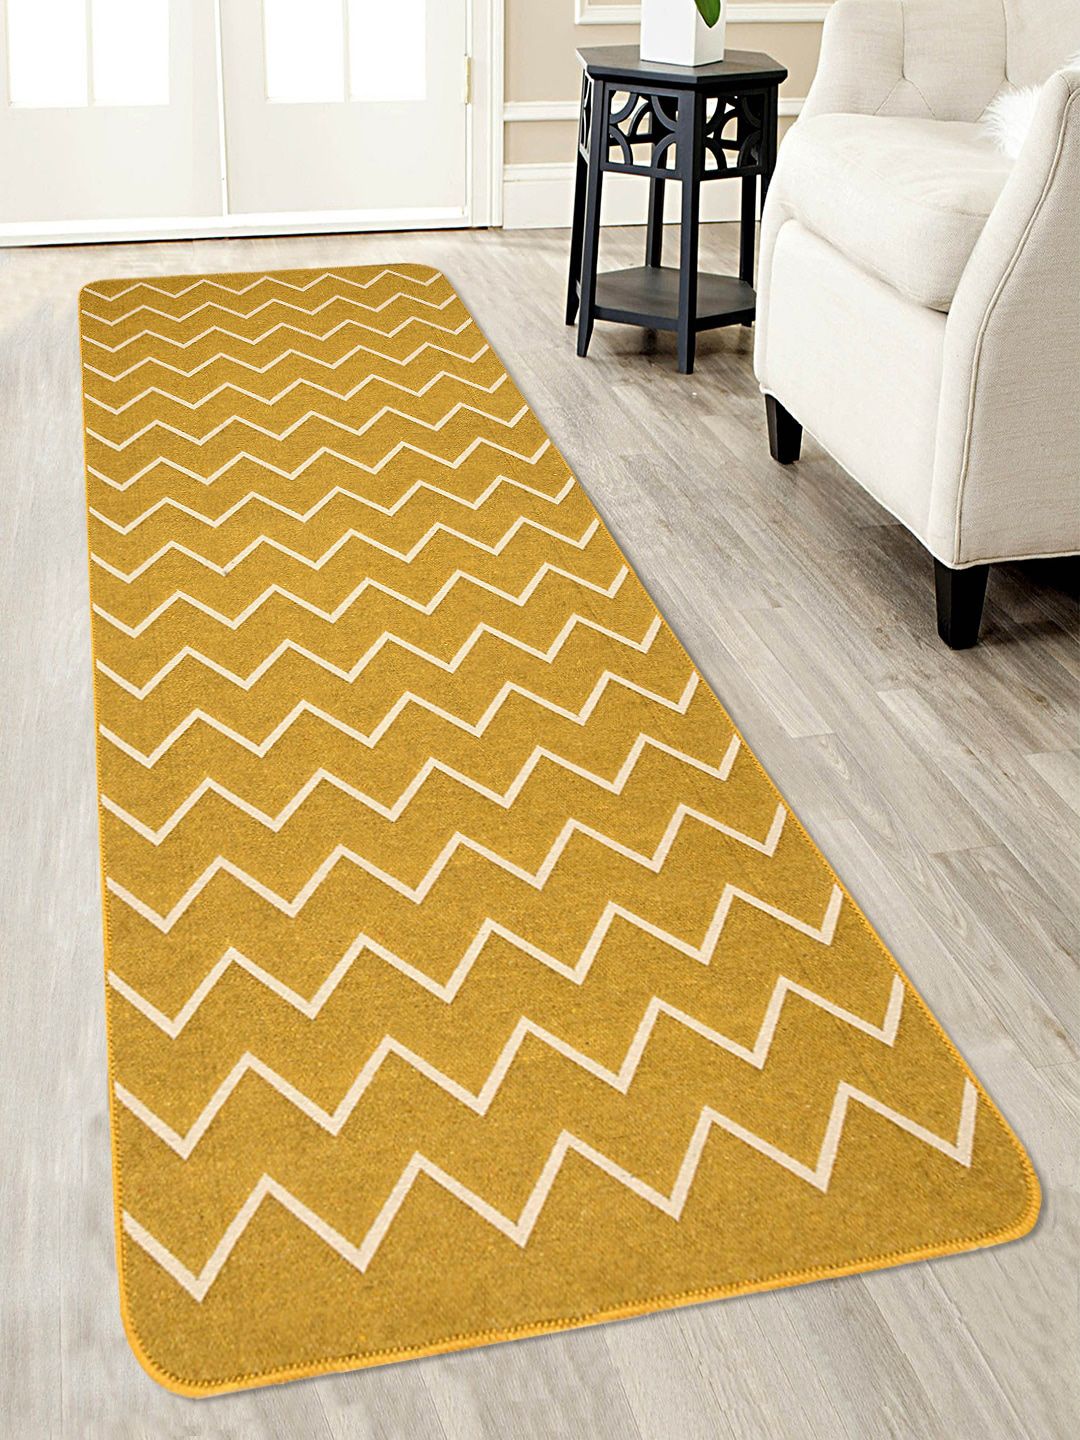 Saral Home Gold-Coloured & Beige Quirky Jacquard Anti-Skid Floor Runner Price in India